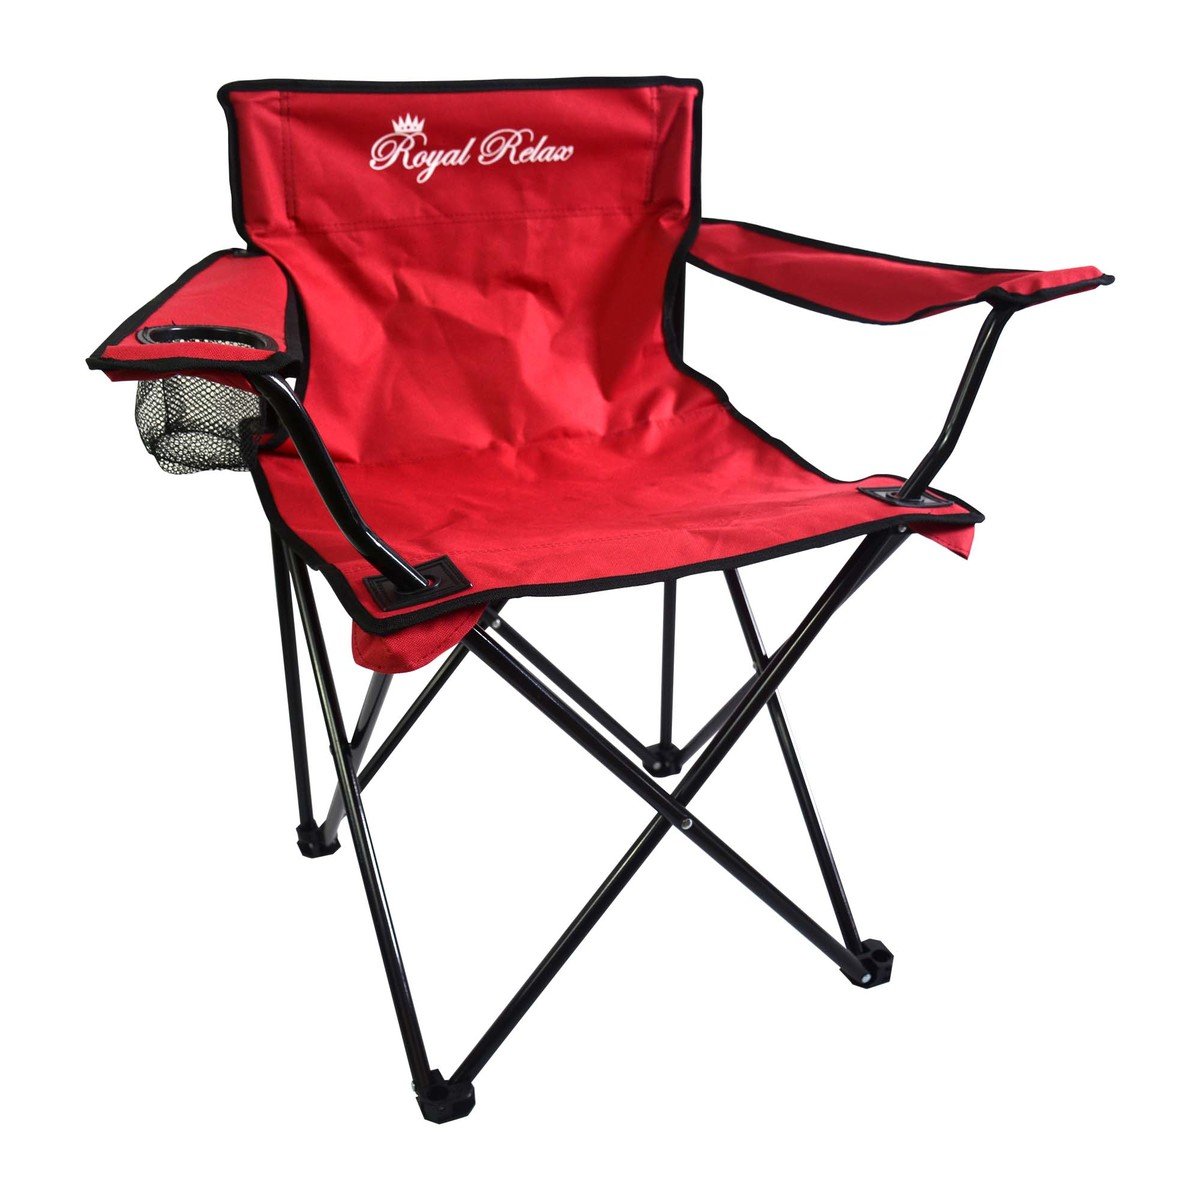 Relax Camping Chair 1pc Assorted Colors HX055 